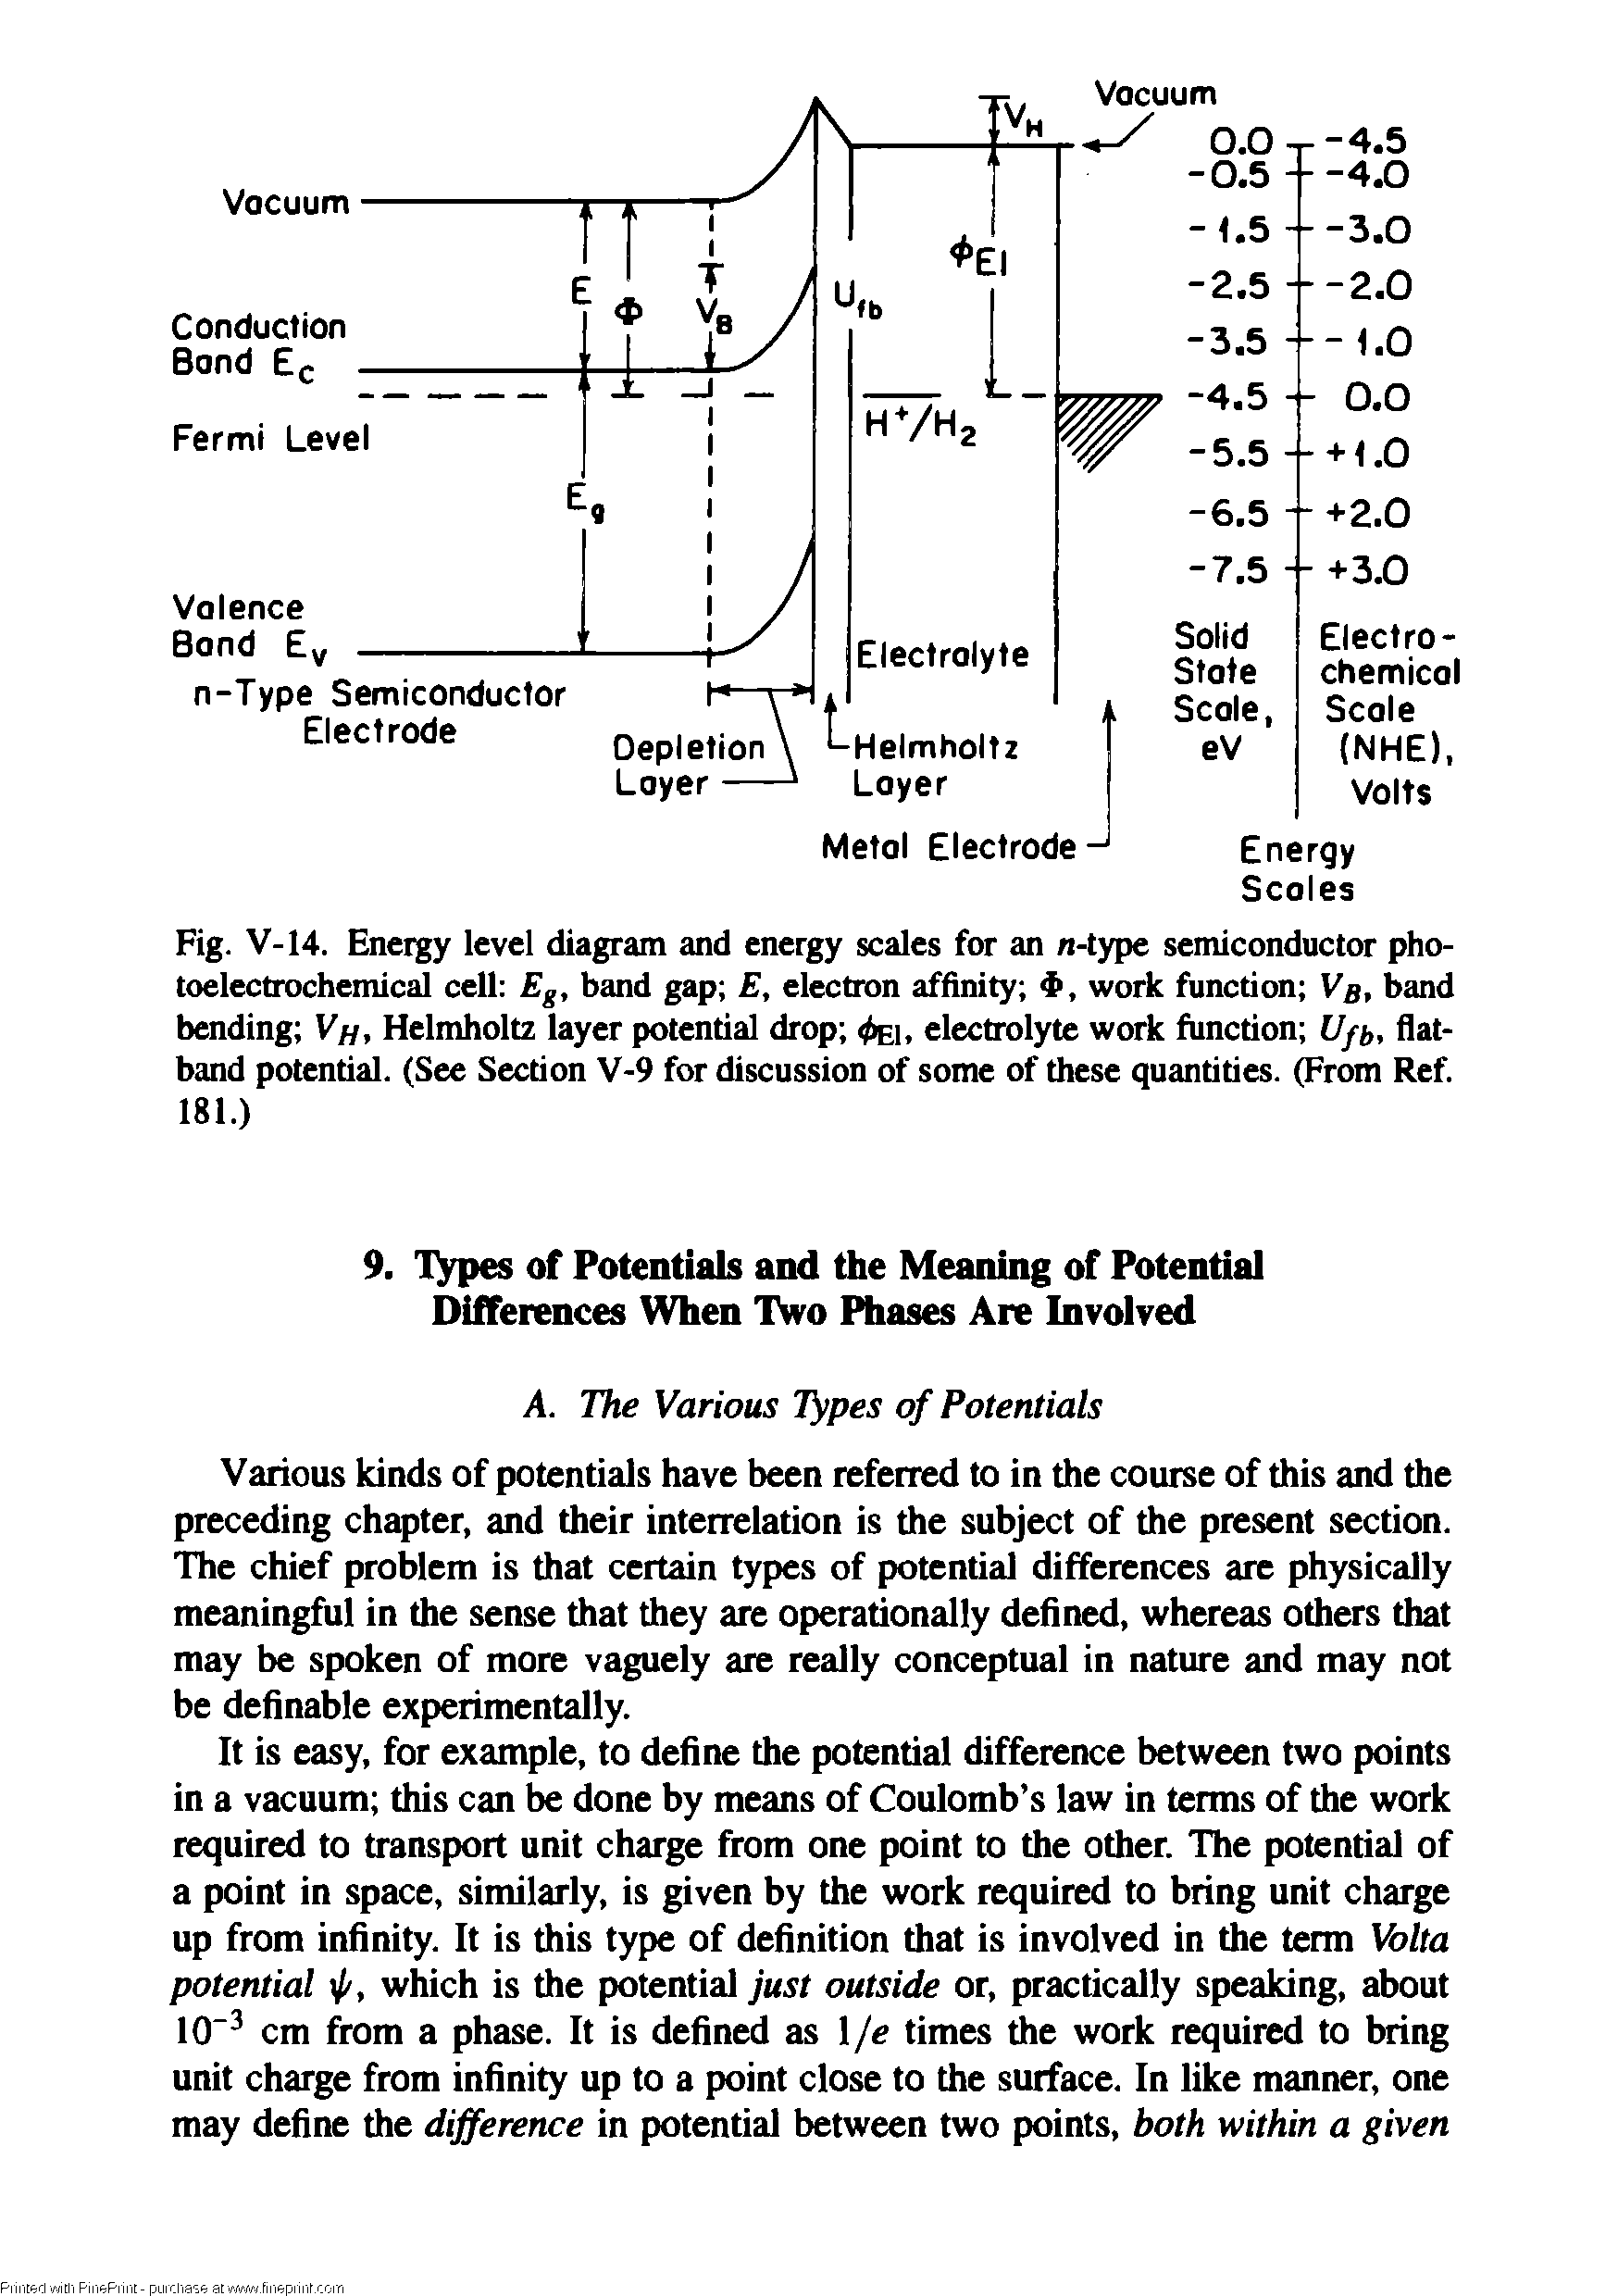 Fig. V-14. Energy level diagram and energy scales for an n-type semiconductor pho-toelectrochemical cell Eg, band gap E, electron affinity work function Vb, band bending Vh, Helmholtz layer potential drop 0ei. electrolyte work function U/b, flat-band potential. (See Section V-9 for discussion of some of these quantities. (From Ref. 181.)...